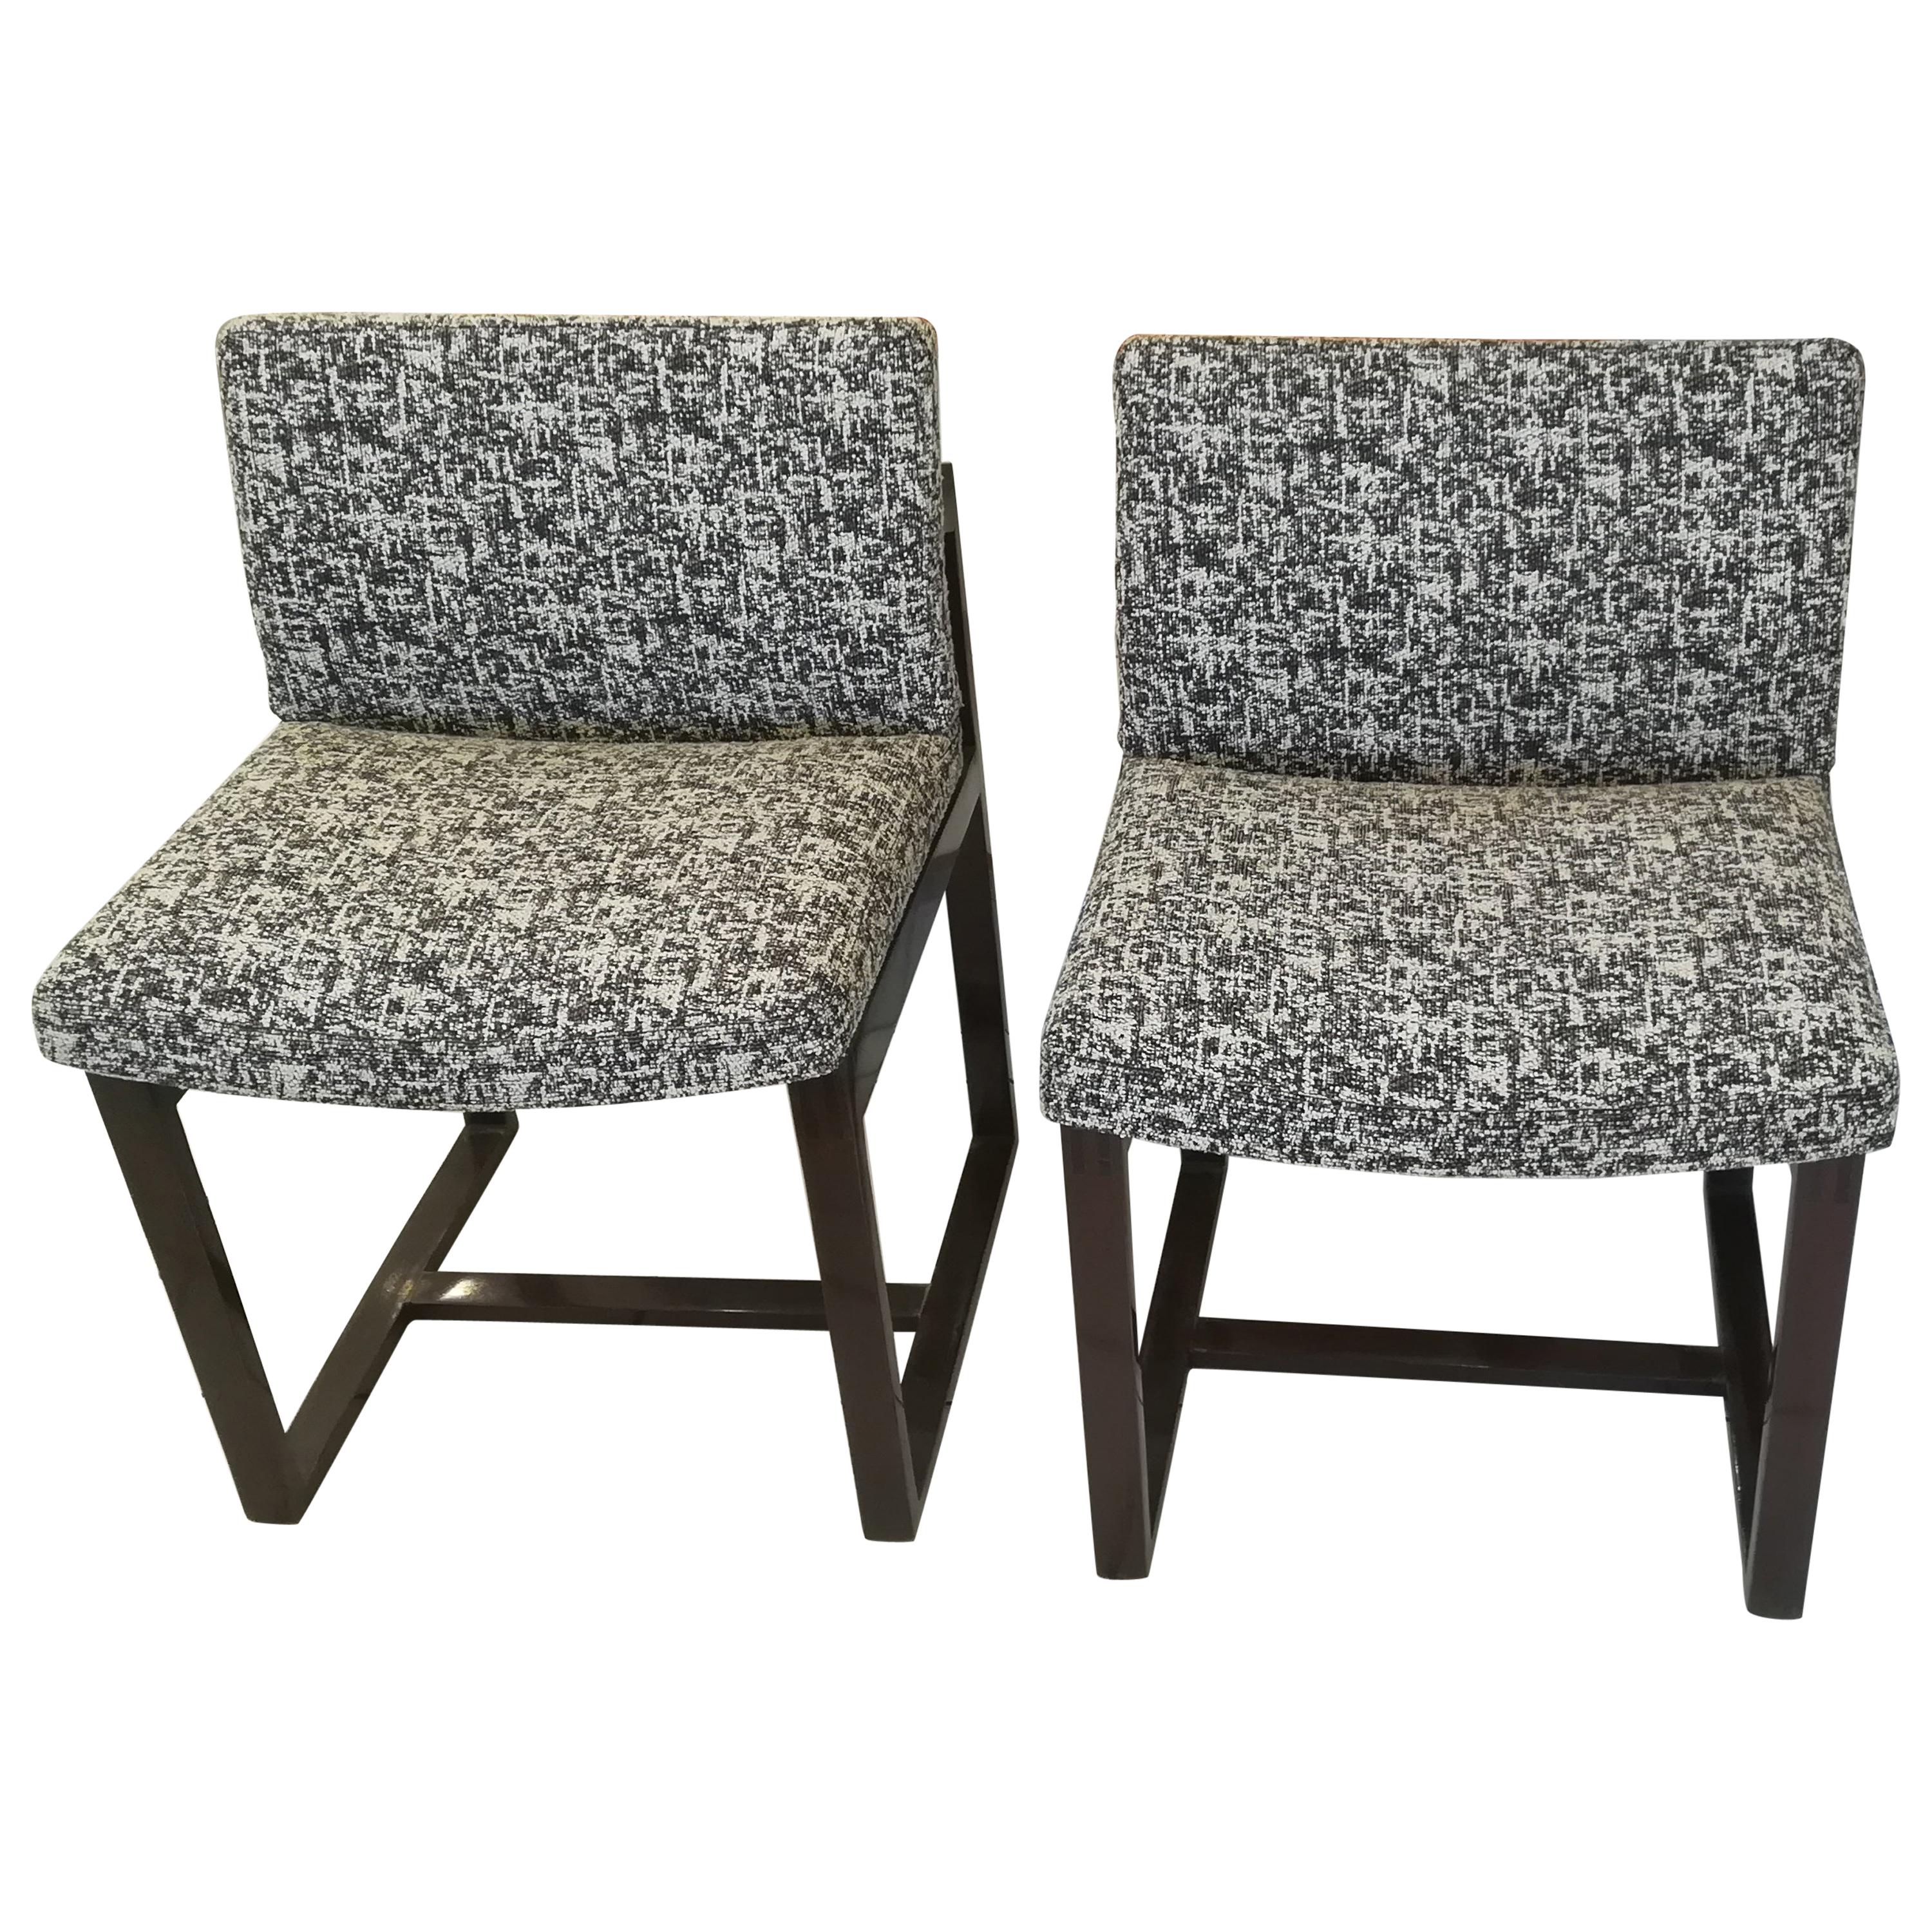 Pair of Andre Sornay Seats, circa 1950 For Sale